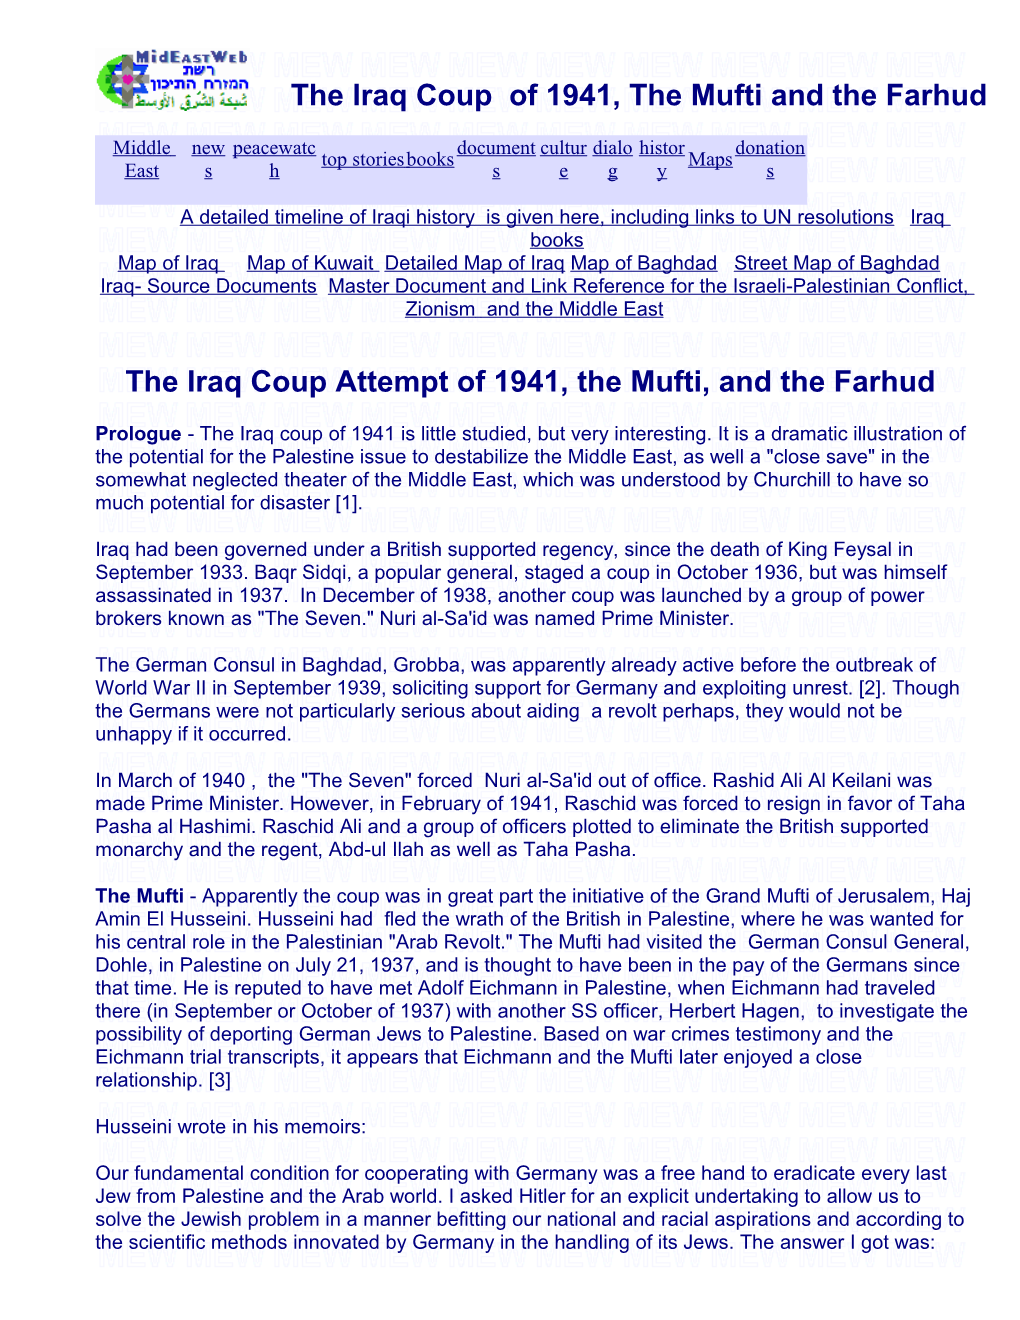 The Iraq Coup of Raschid Ali in 1941, the Mufti Husseini and the Farhud